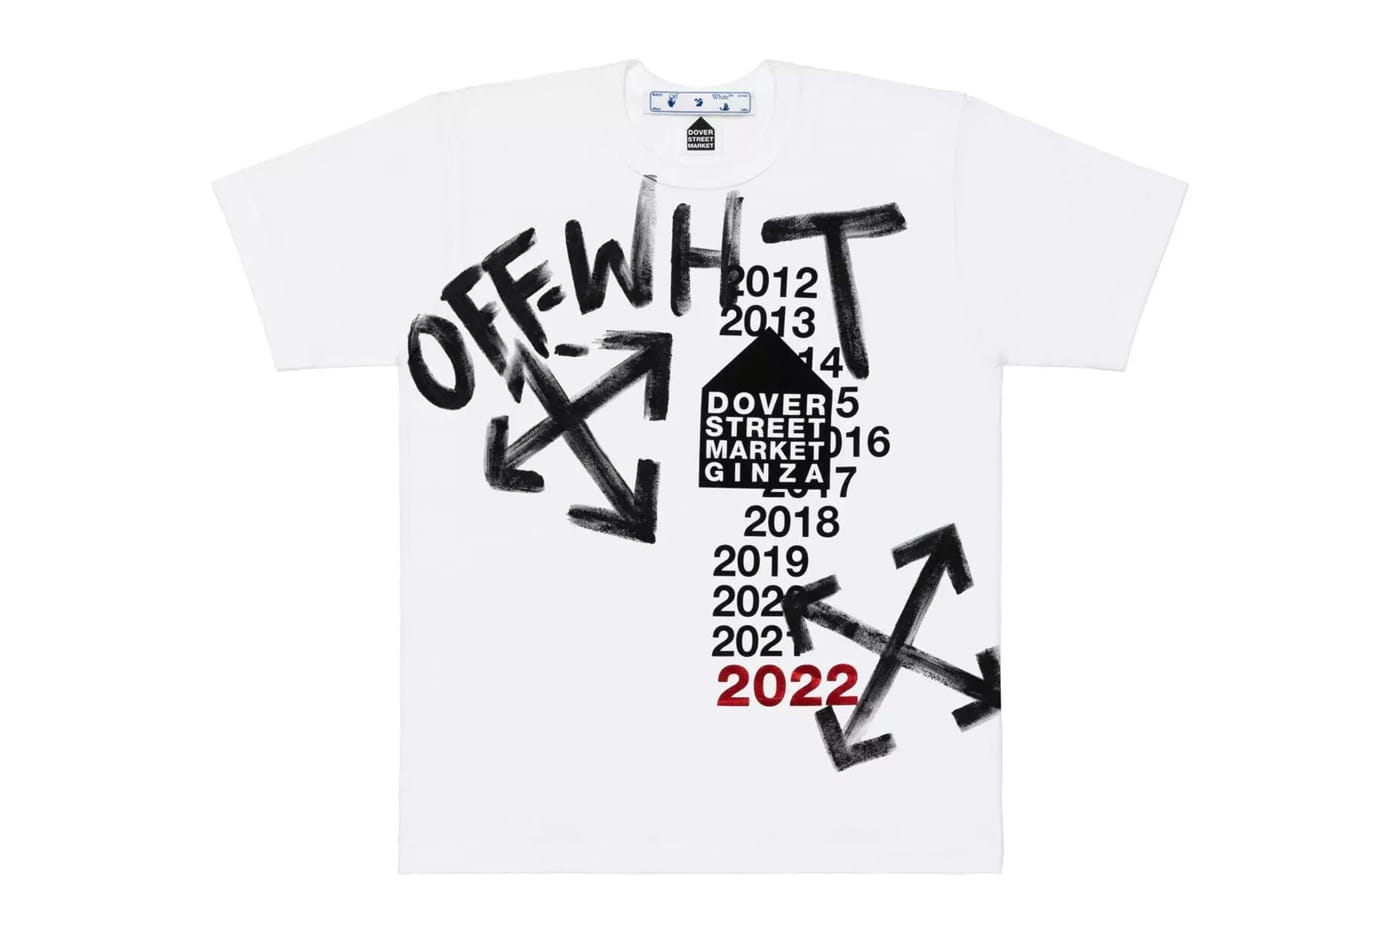 Dover Street Market Ginza 10th-Anniversary Collaborative Tees 